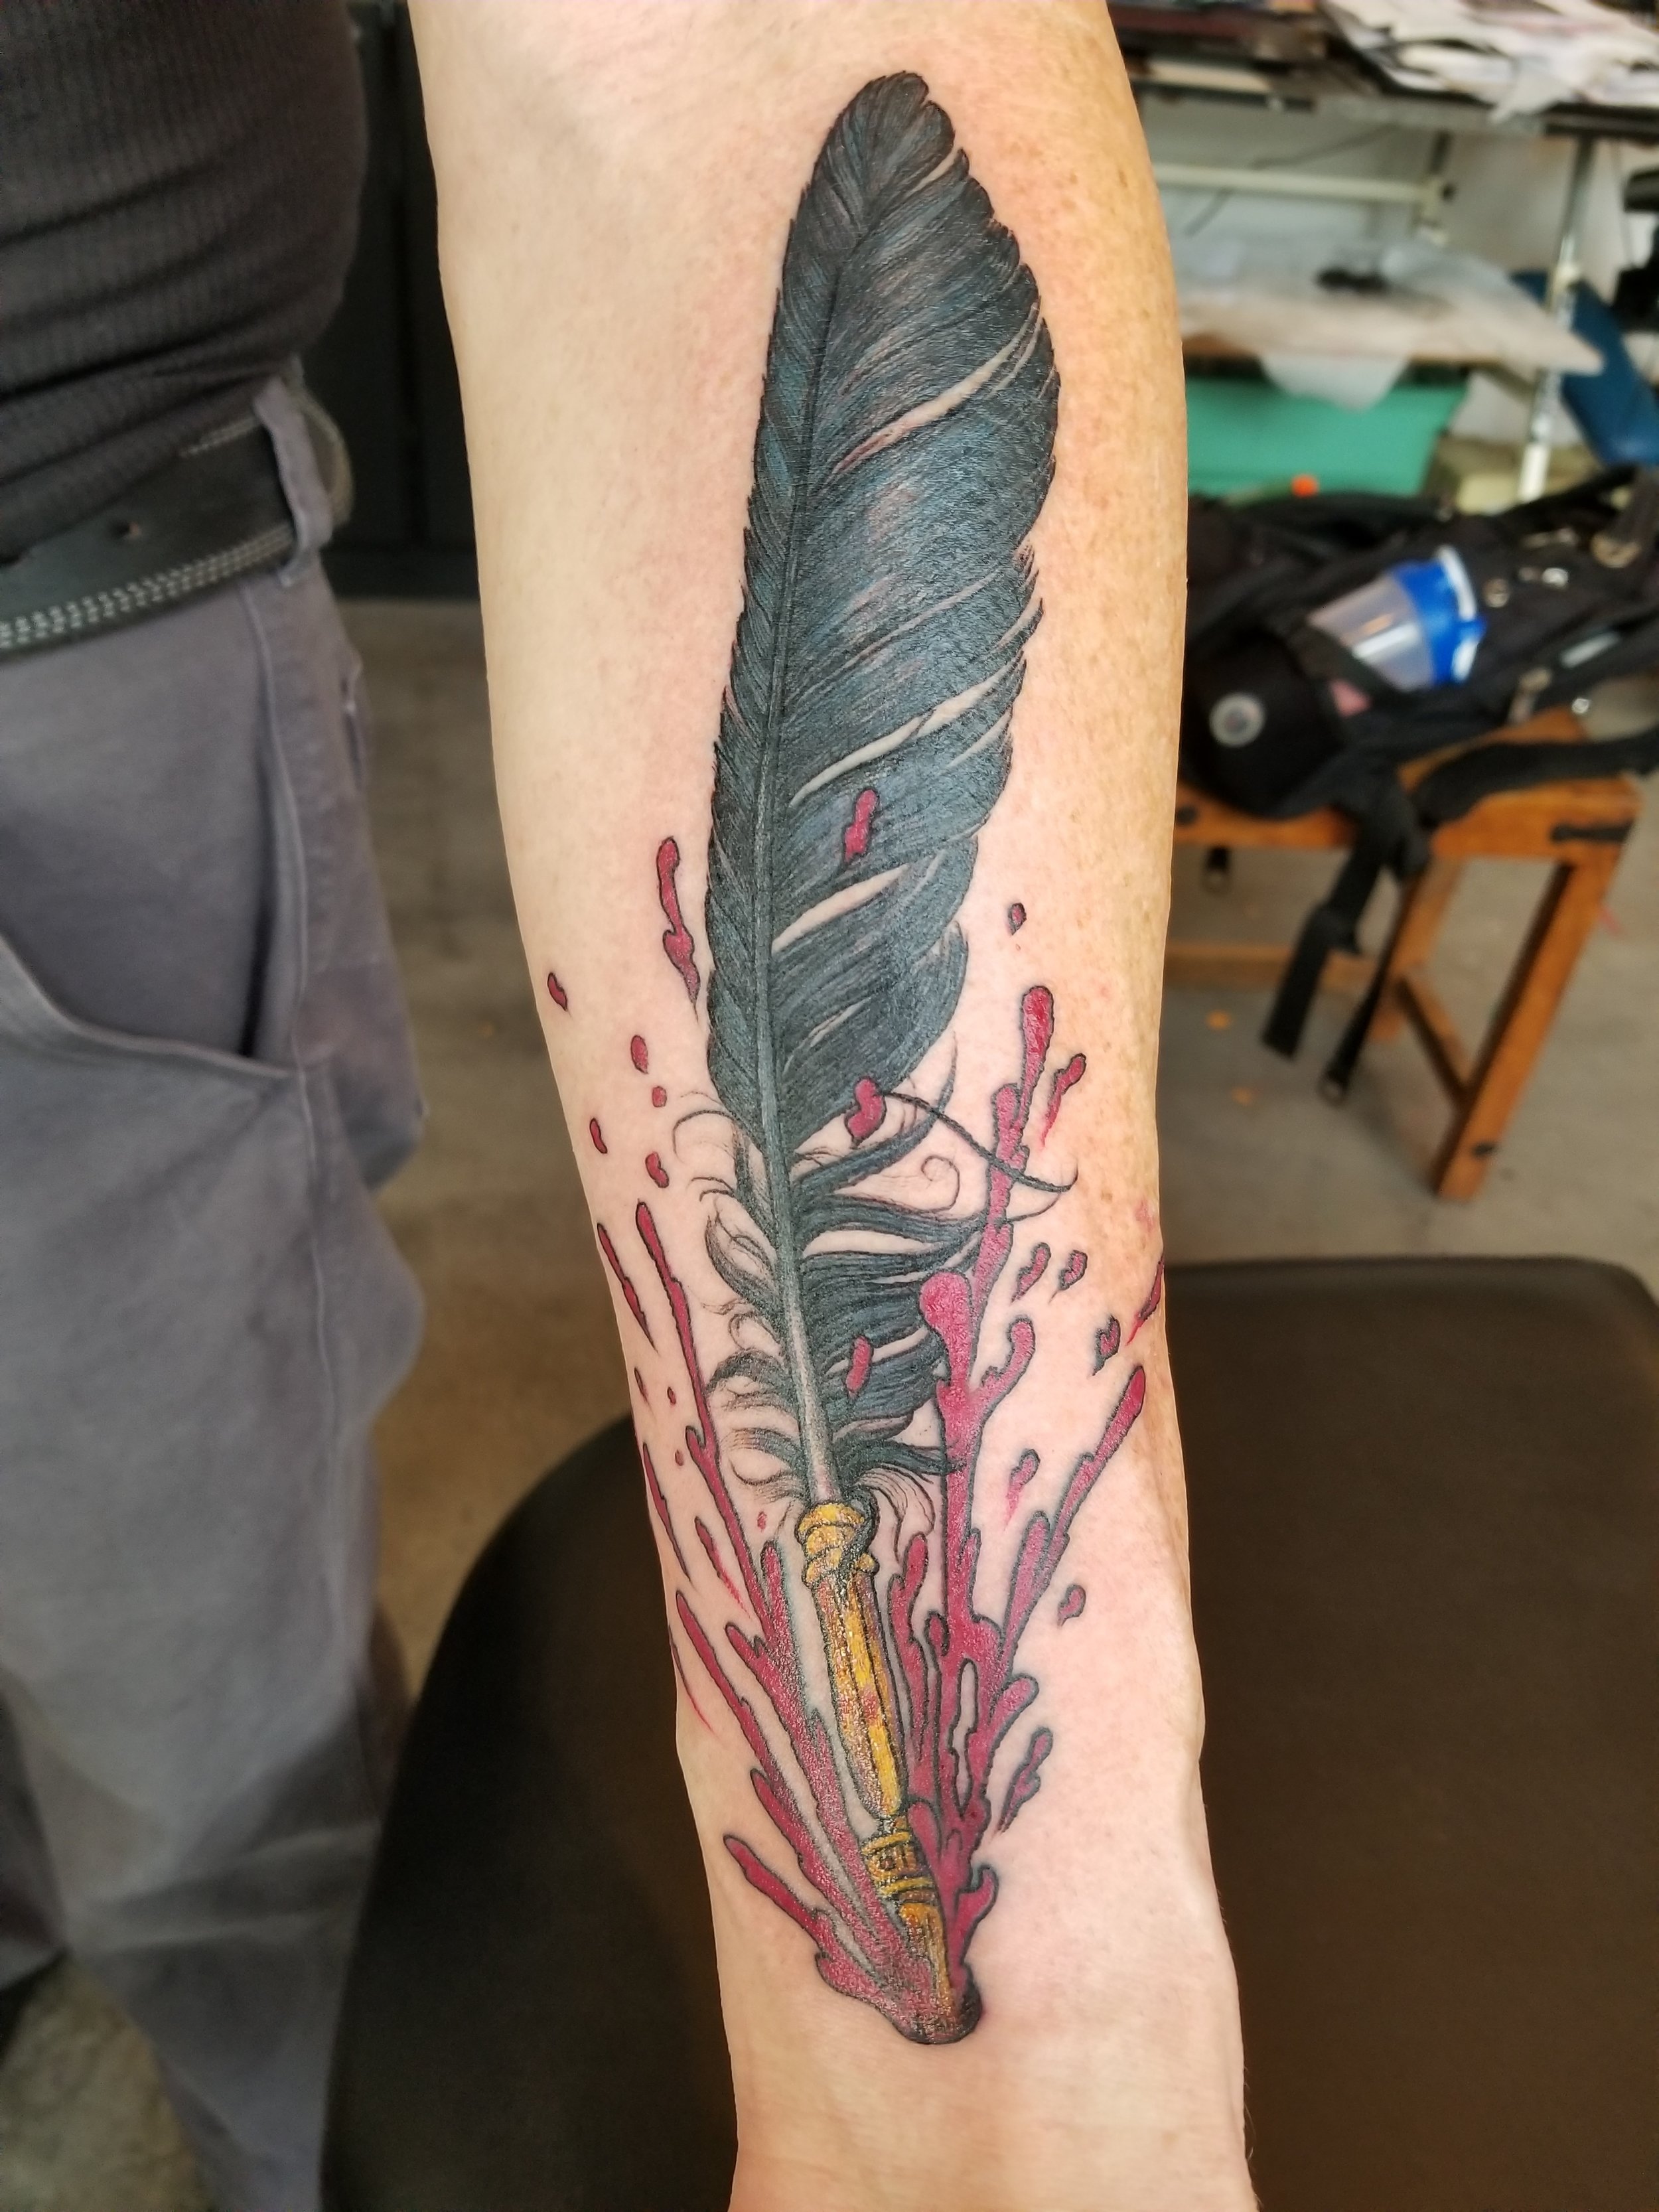 50 Quill Tattoo Designs For Men - Feather Pen Ink Ideas | Quill tattoo, Quill  pen tattoo, Pen tattoo